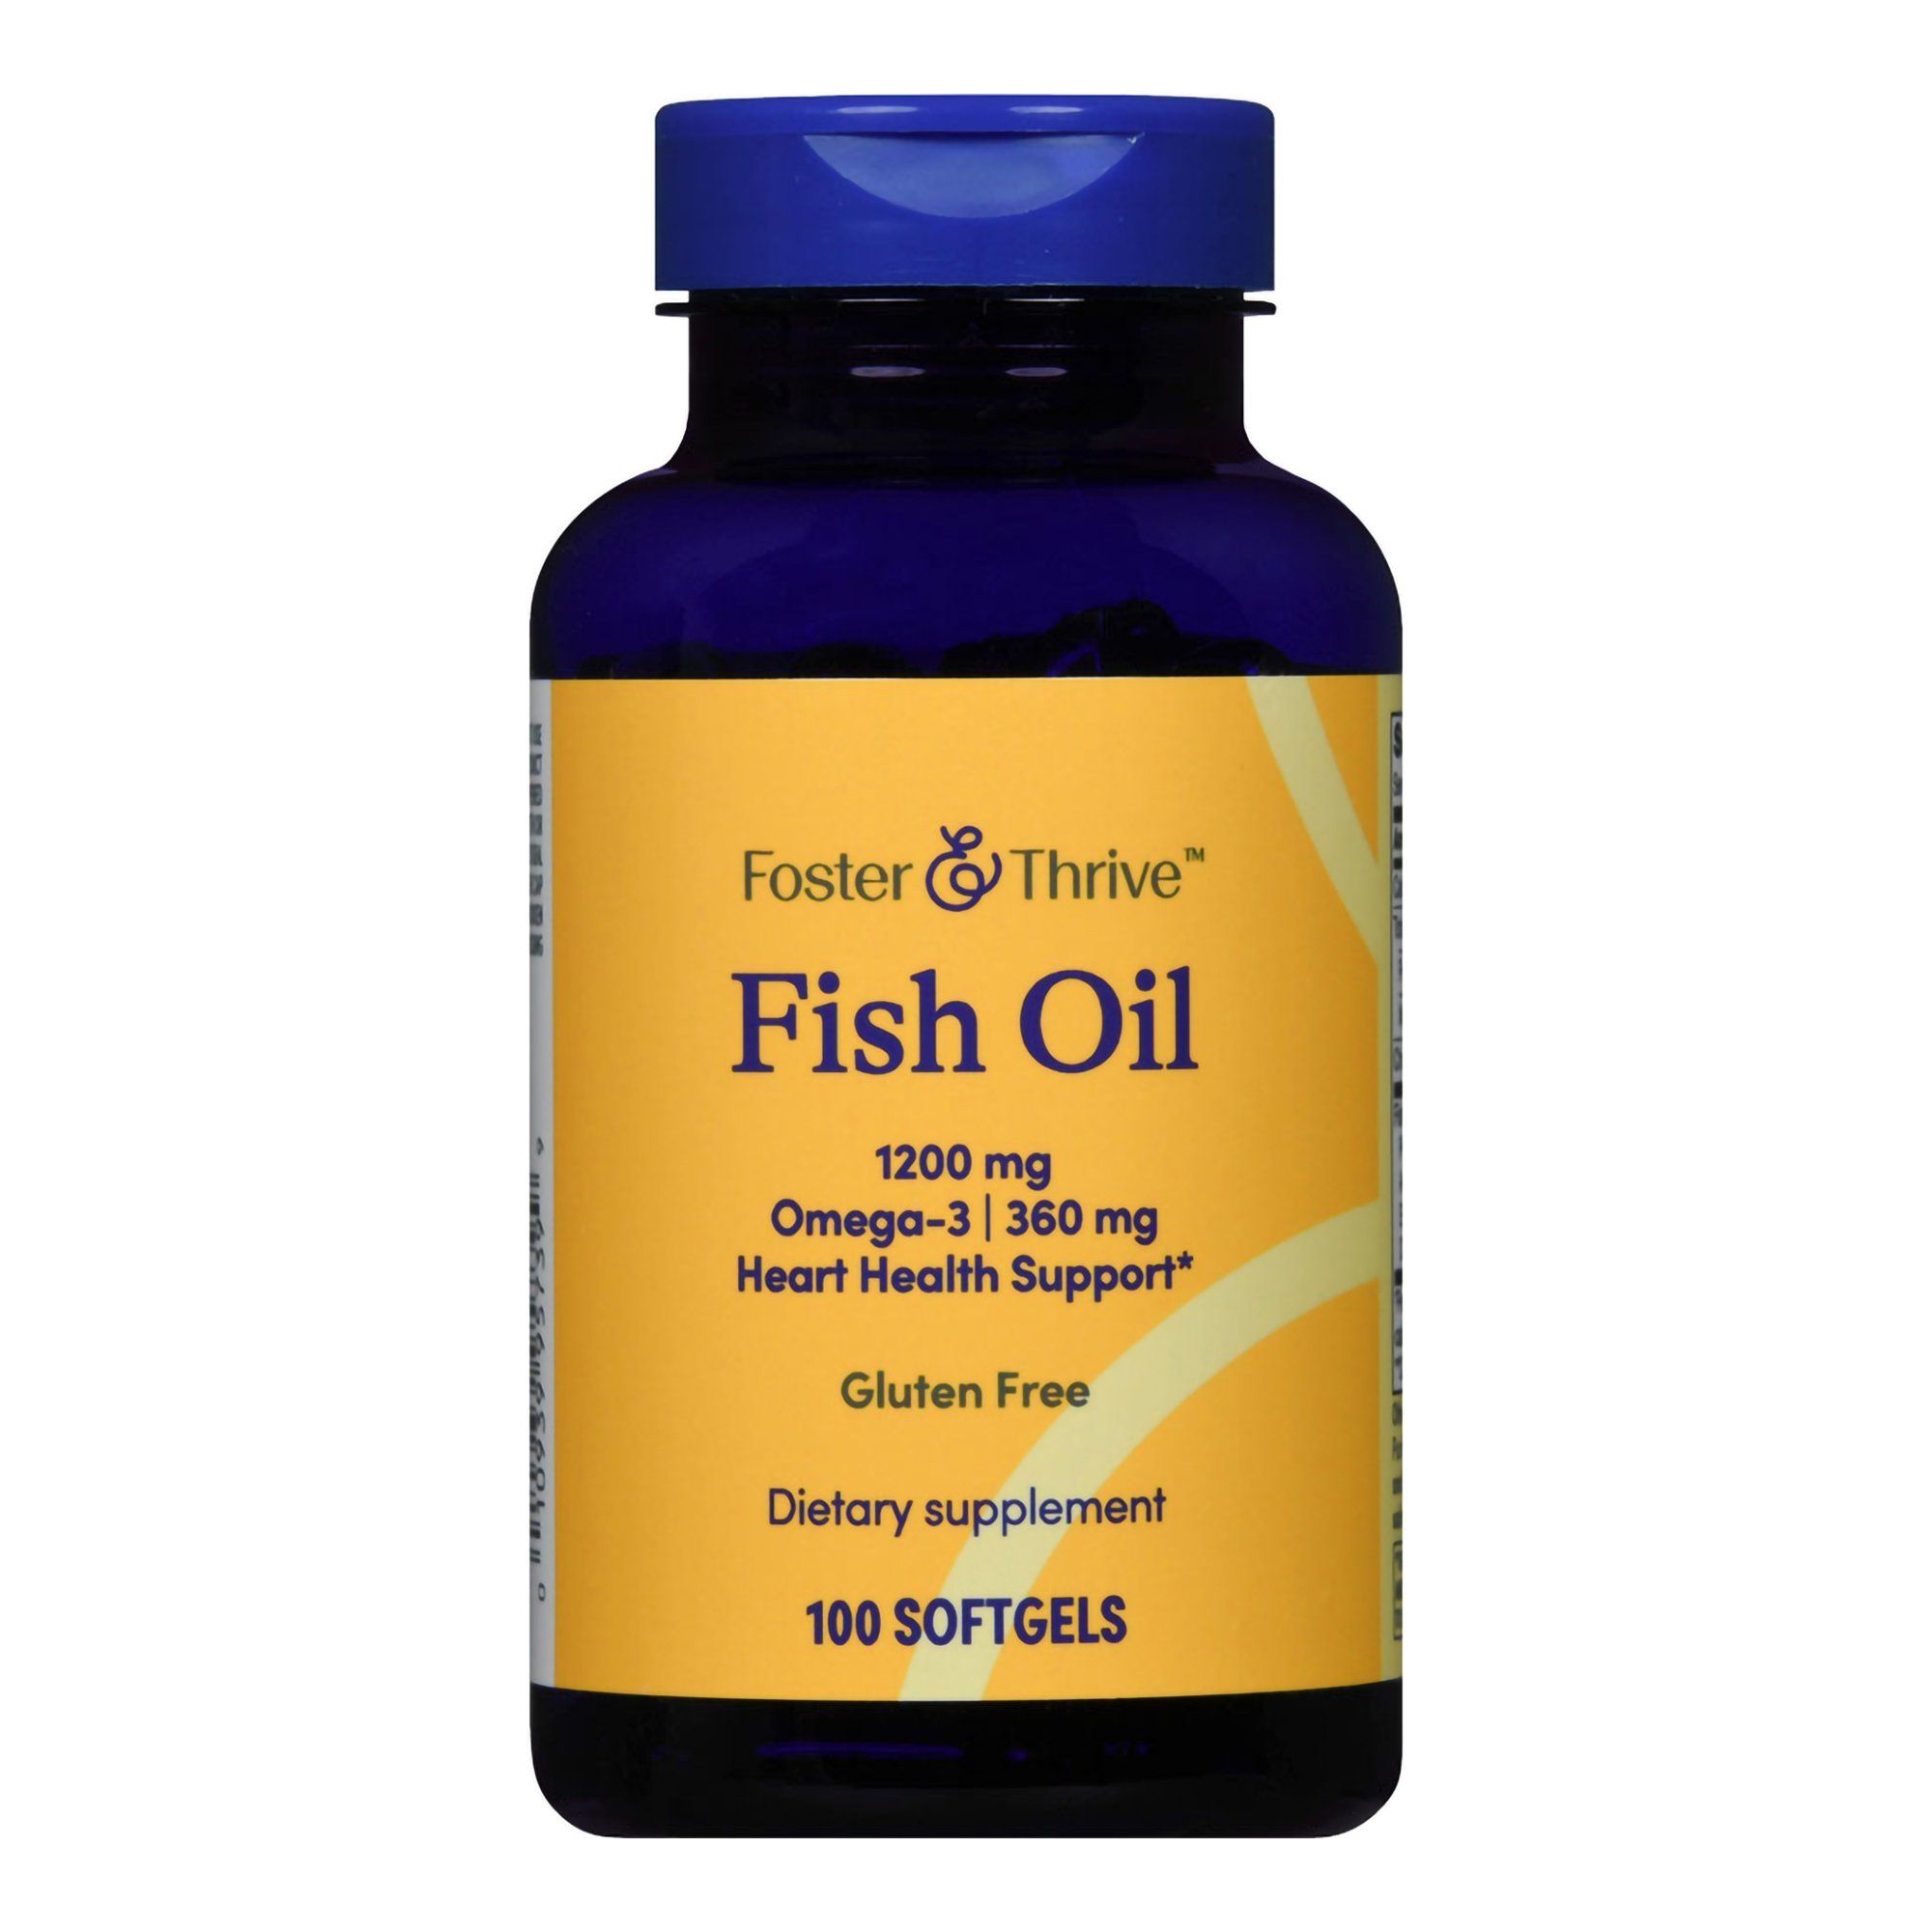 Foster & Thrive Omega 3 Fish Oil Softgels, 1200 mg - 100 ct